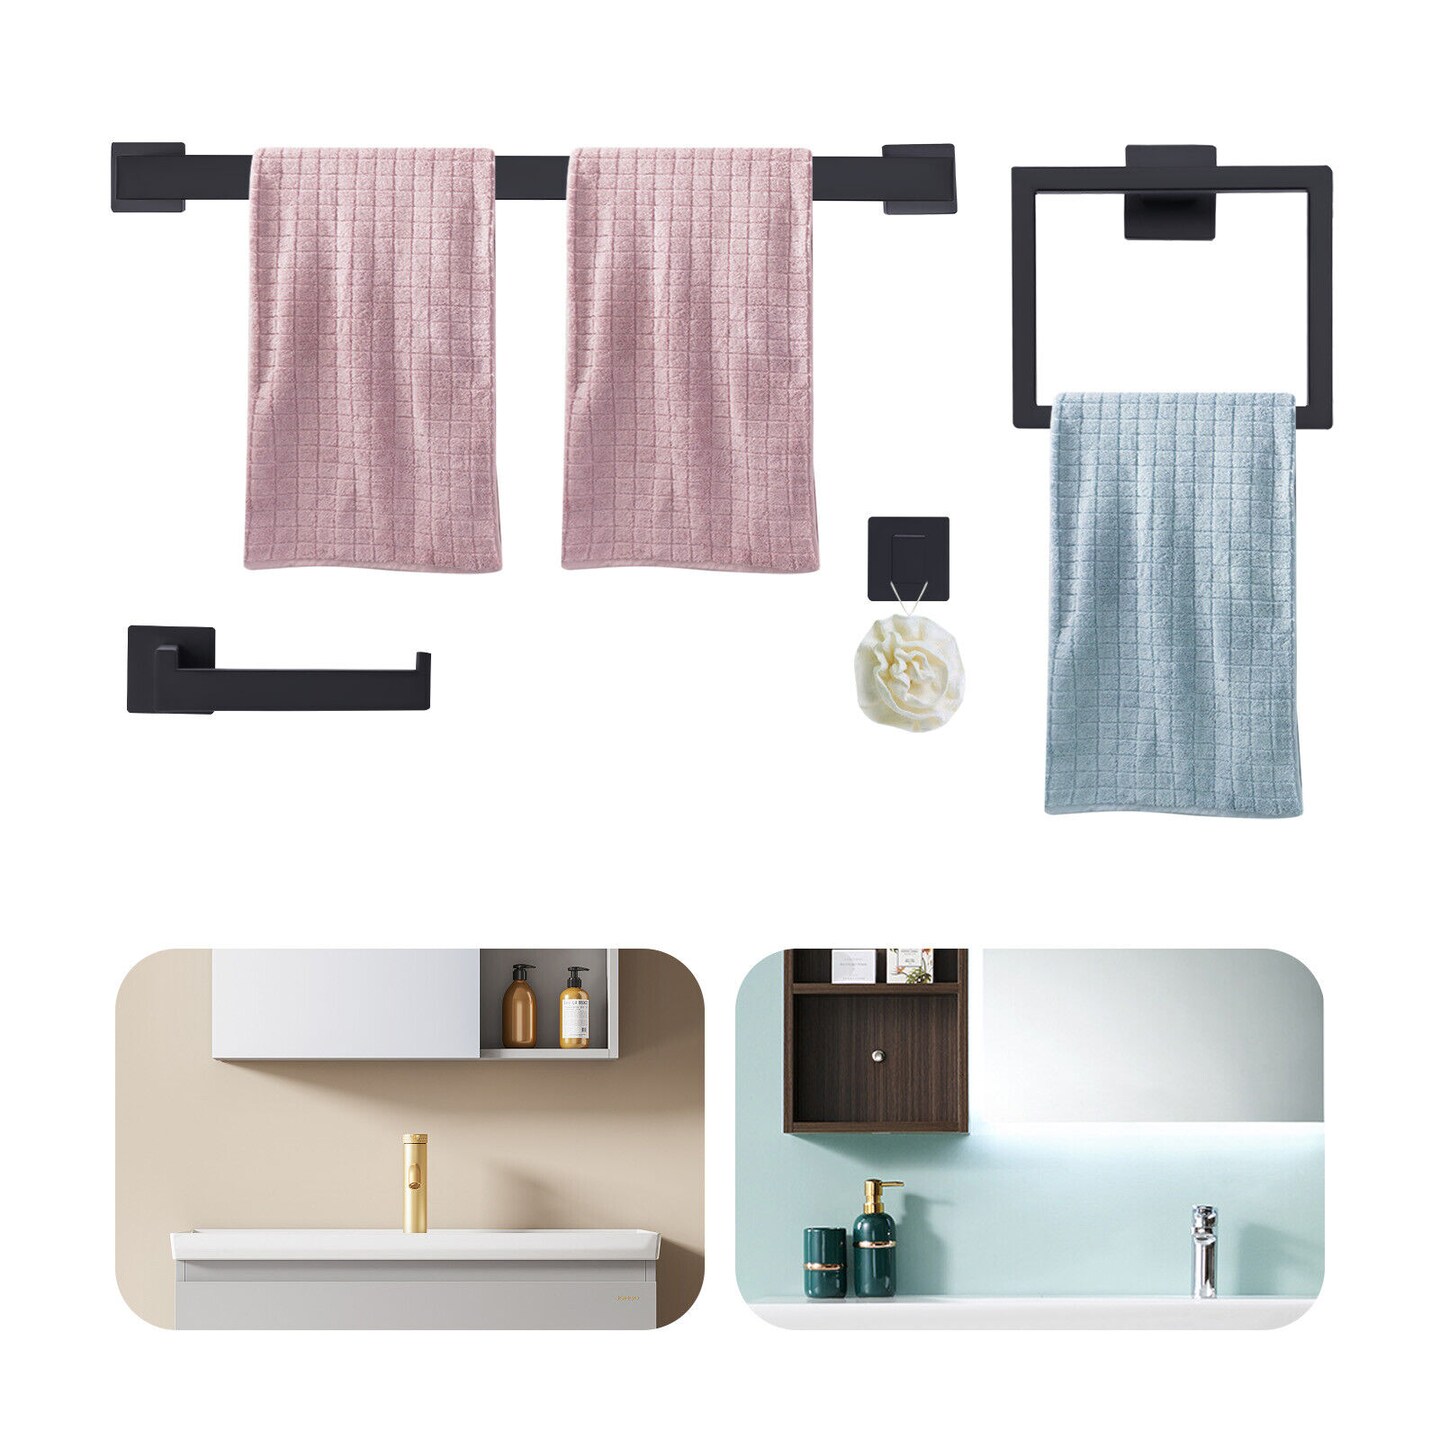 Hardware Wall Stainless Steel Towel Bar 4 pcs